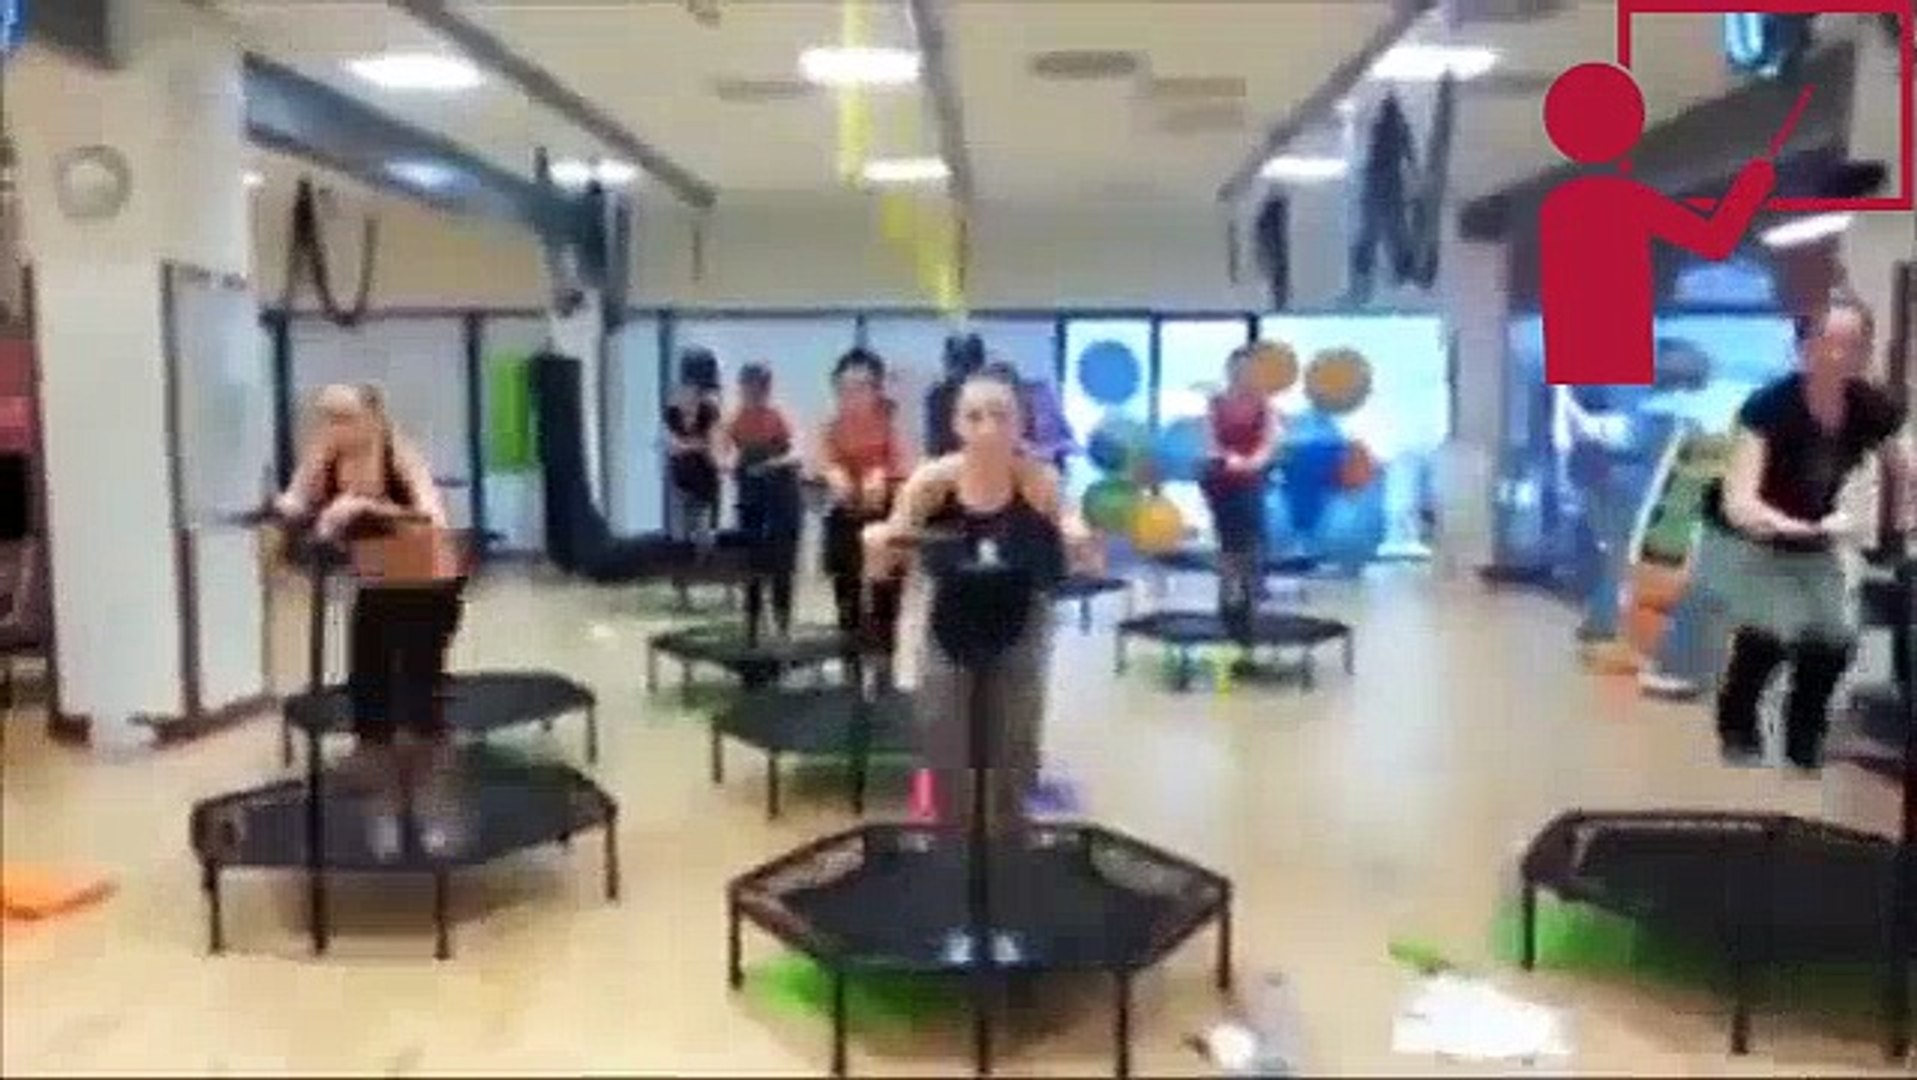 Funny Video: Trampoline Aerobics Class Gets Wild - Dailymotion Video